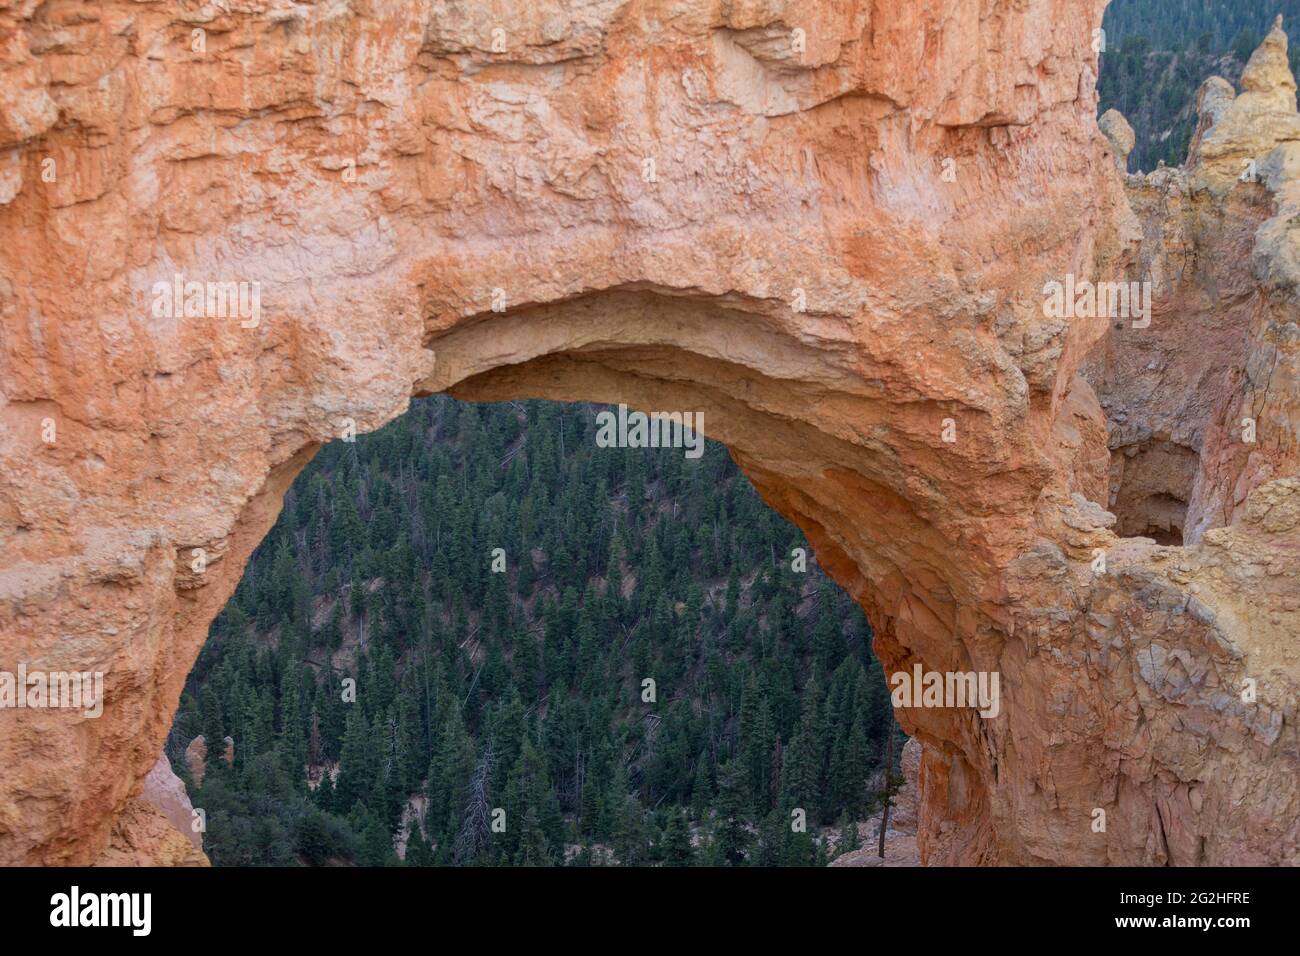 Natural Bridge, a massive 85-ft. red-rock arch carved out of sedimentary red rock by geologic forces over millions of years. Bryce Canyon National Park, Utah, USA Stock Photo